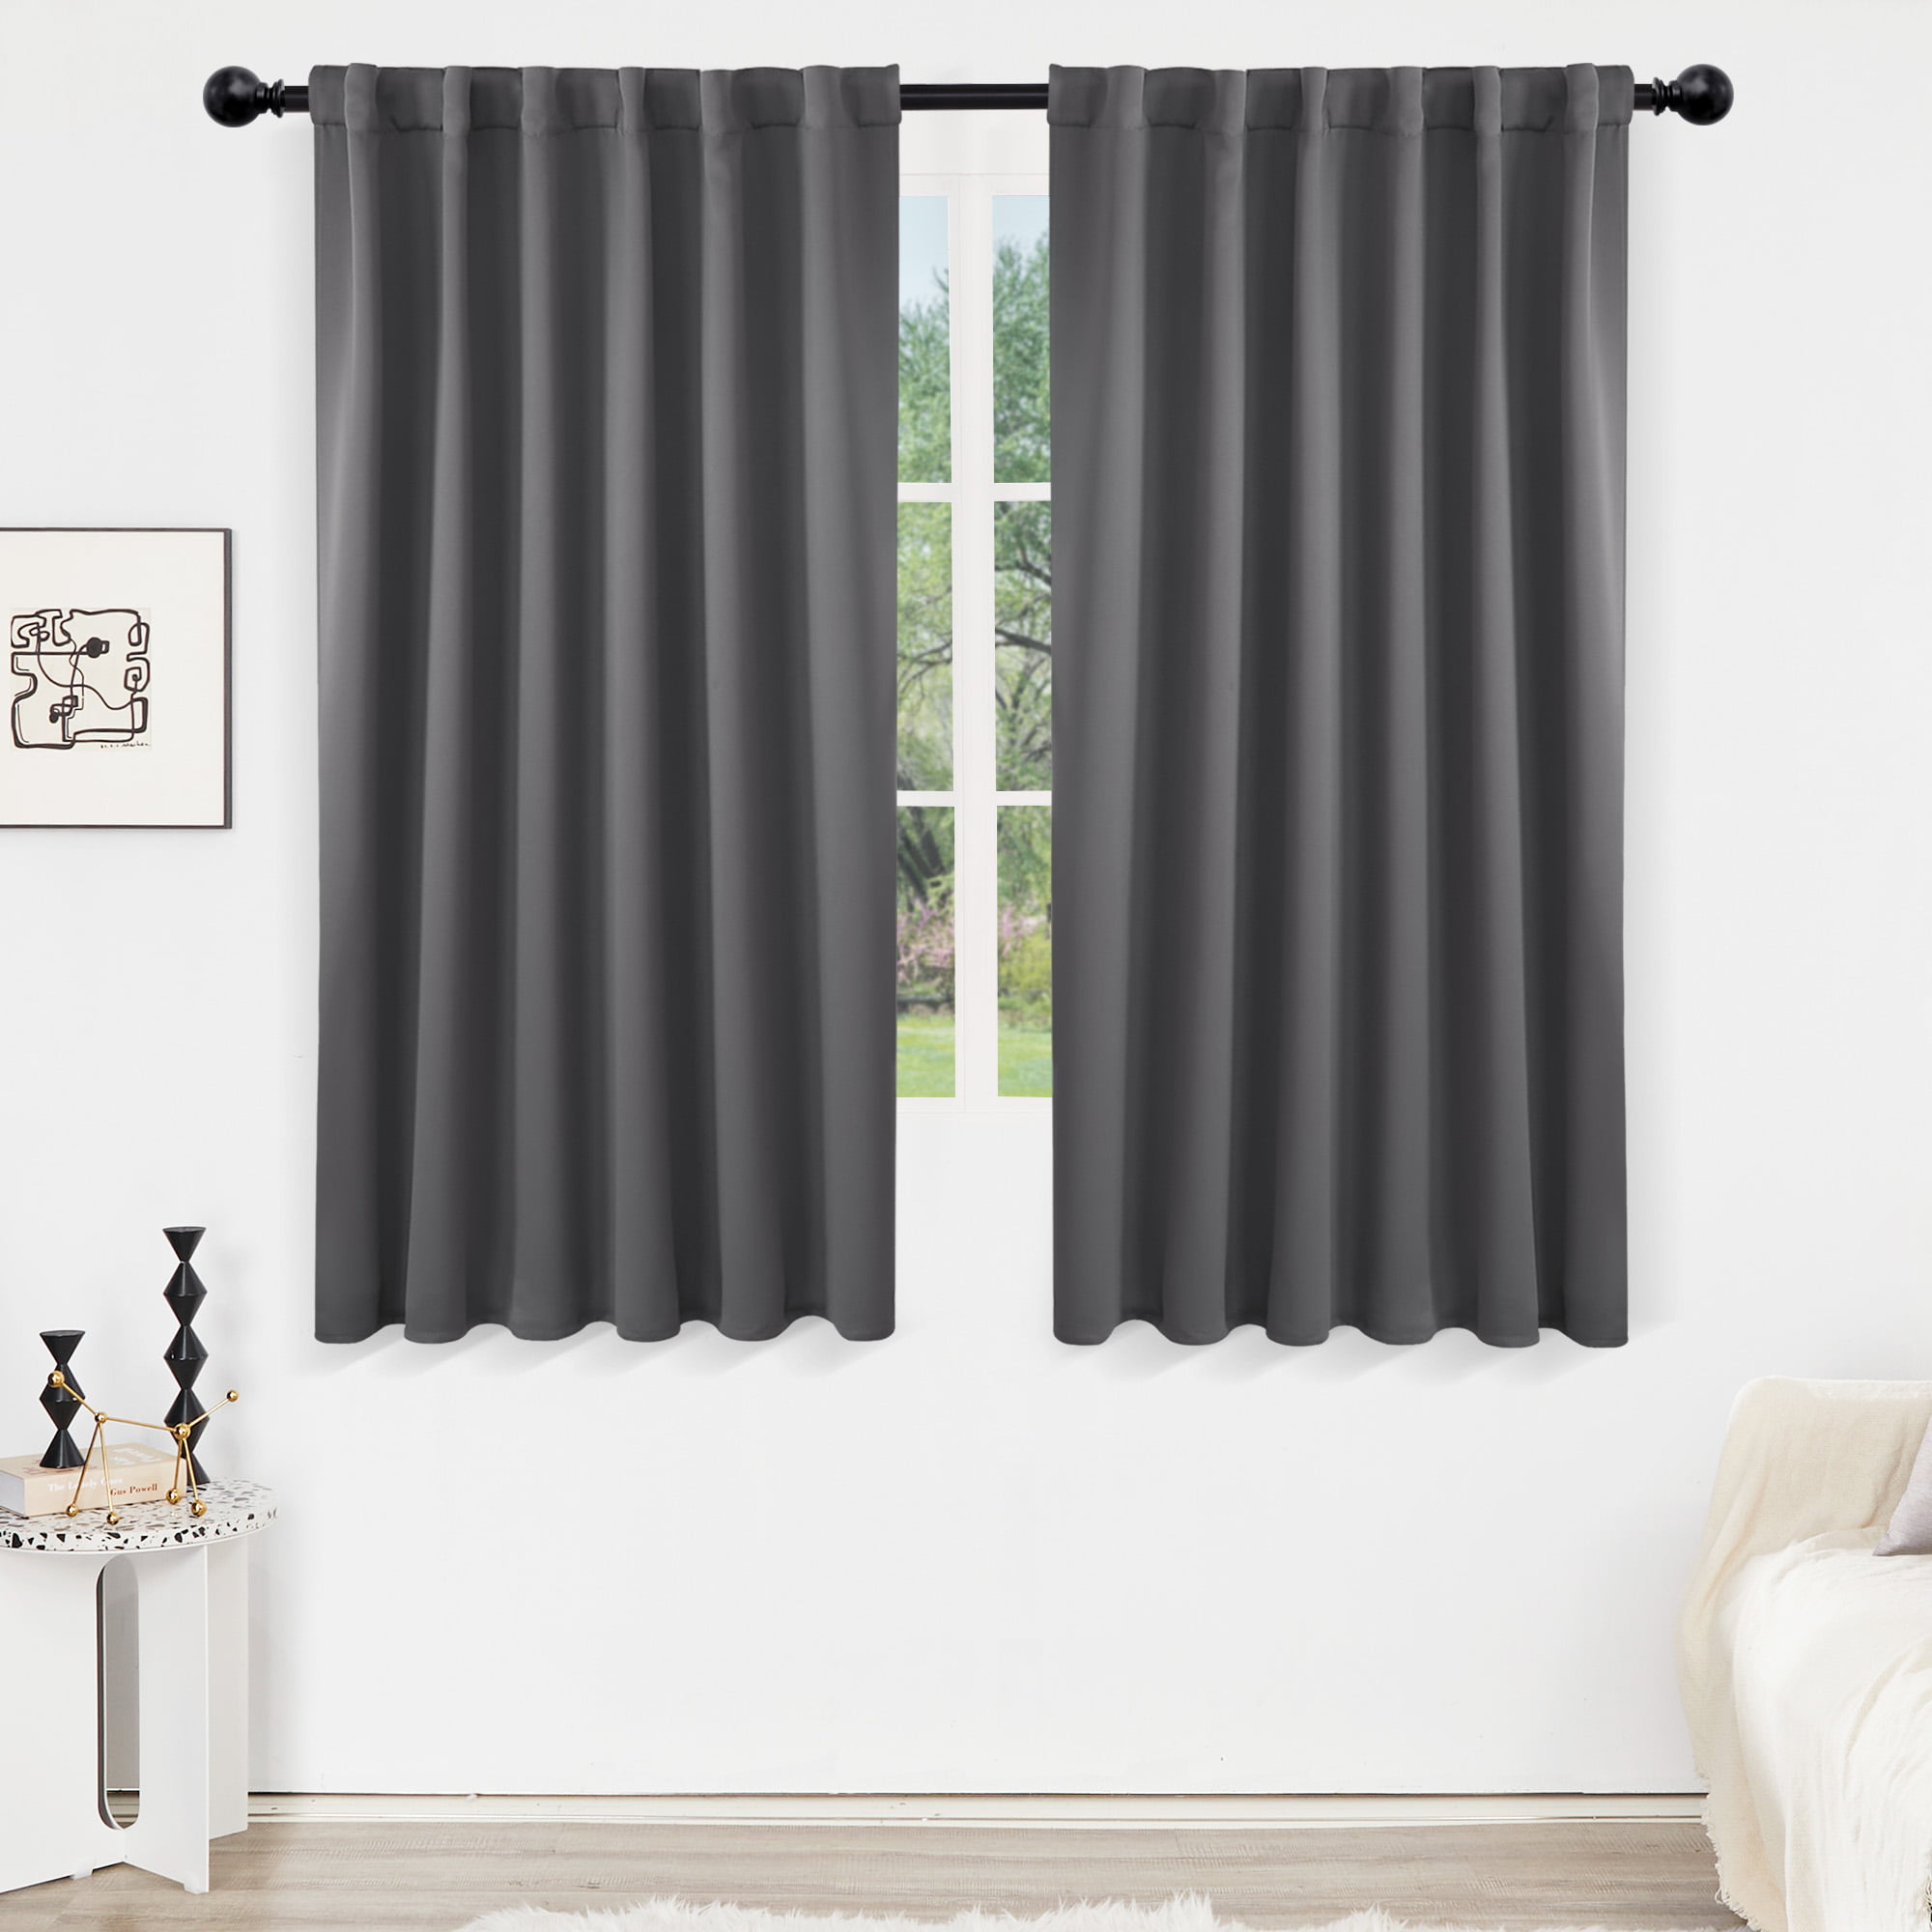 Details about   Gray 144 inch H Fire Treated Velvet Curtain Panel w/Rod Pocket Extra Long Drape 